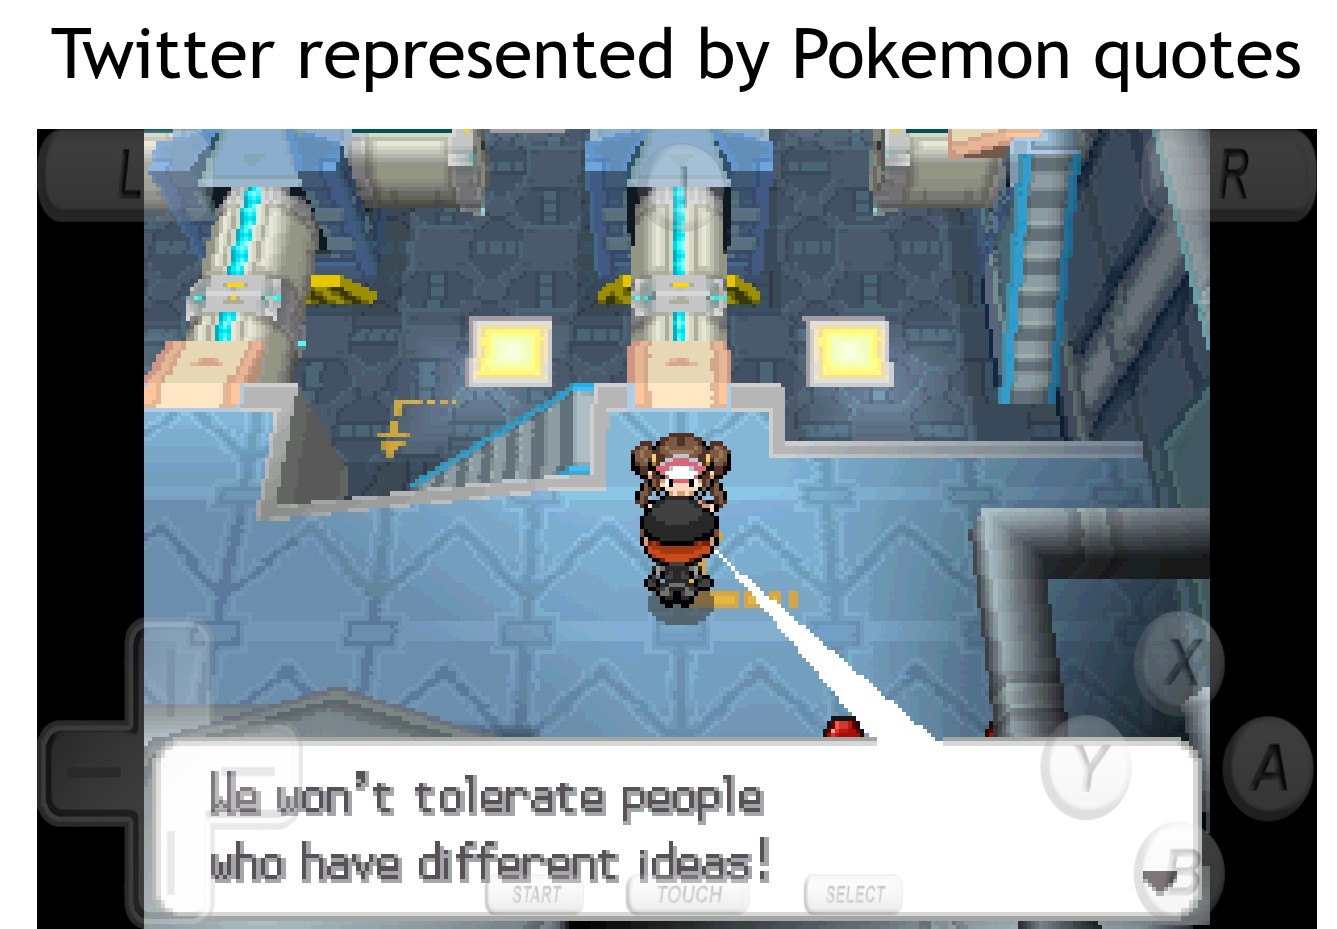 funny gaming memes - games - Twitter represented by Pokemon quotes R. Trit X He won't tolerate people who have different ideas! Start Touch Select